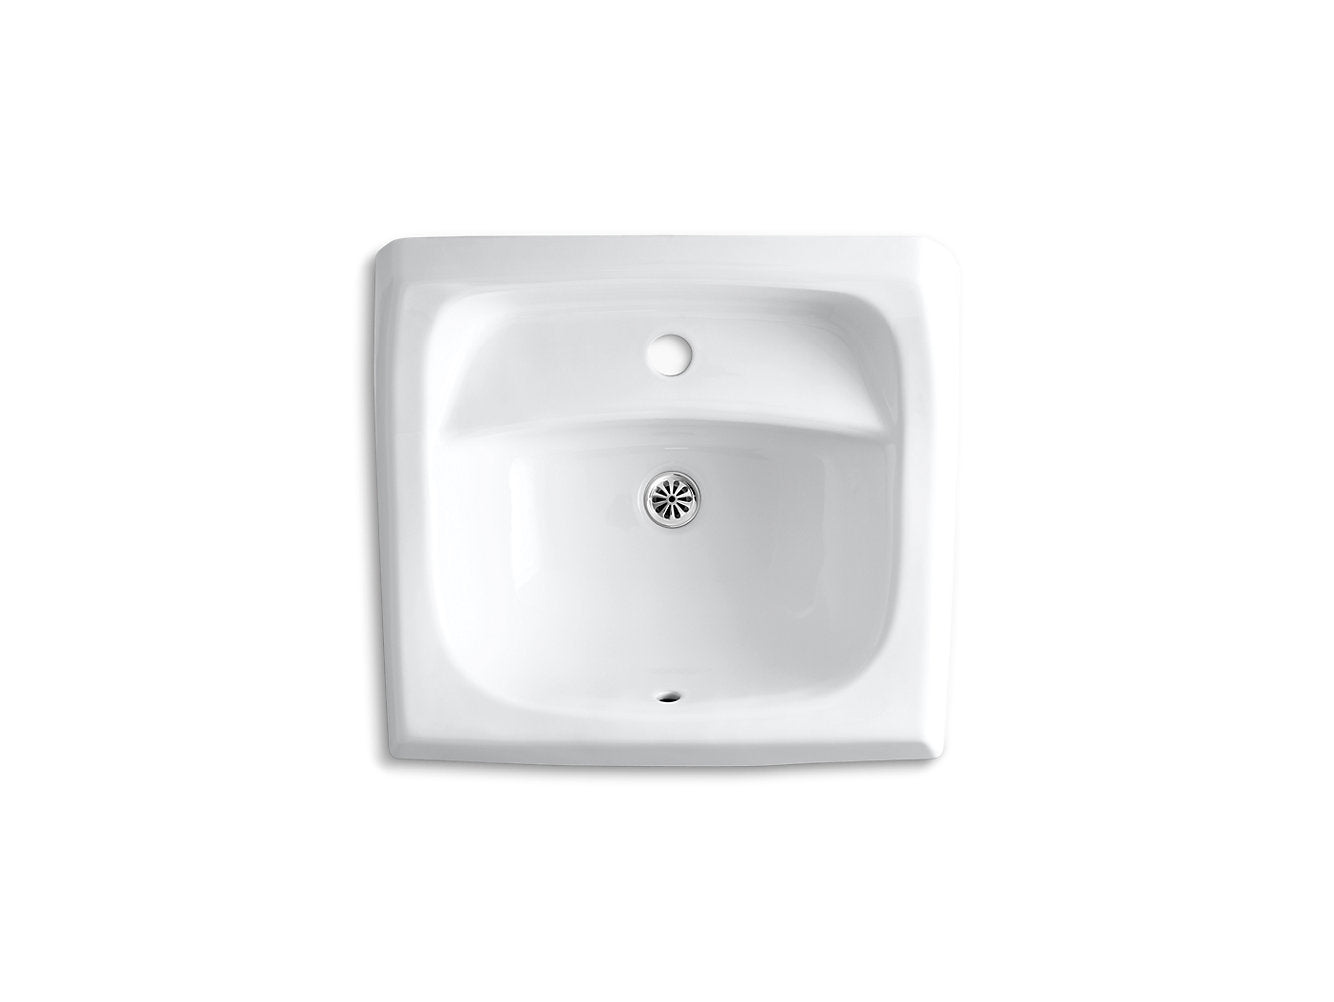 Kohler Kingston 21-1/4" x 18-1/8" Wall Mount Concealed Arm Carrier Arm Bathroom Sink With Single Faucet Hole - White